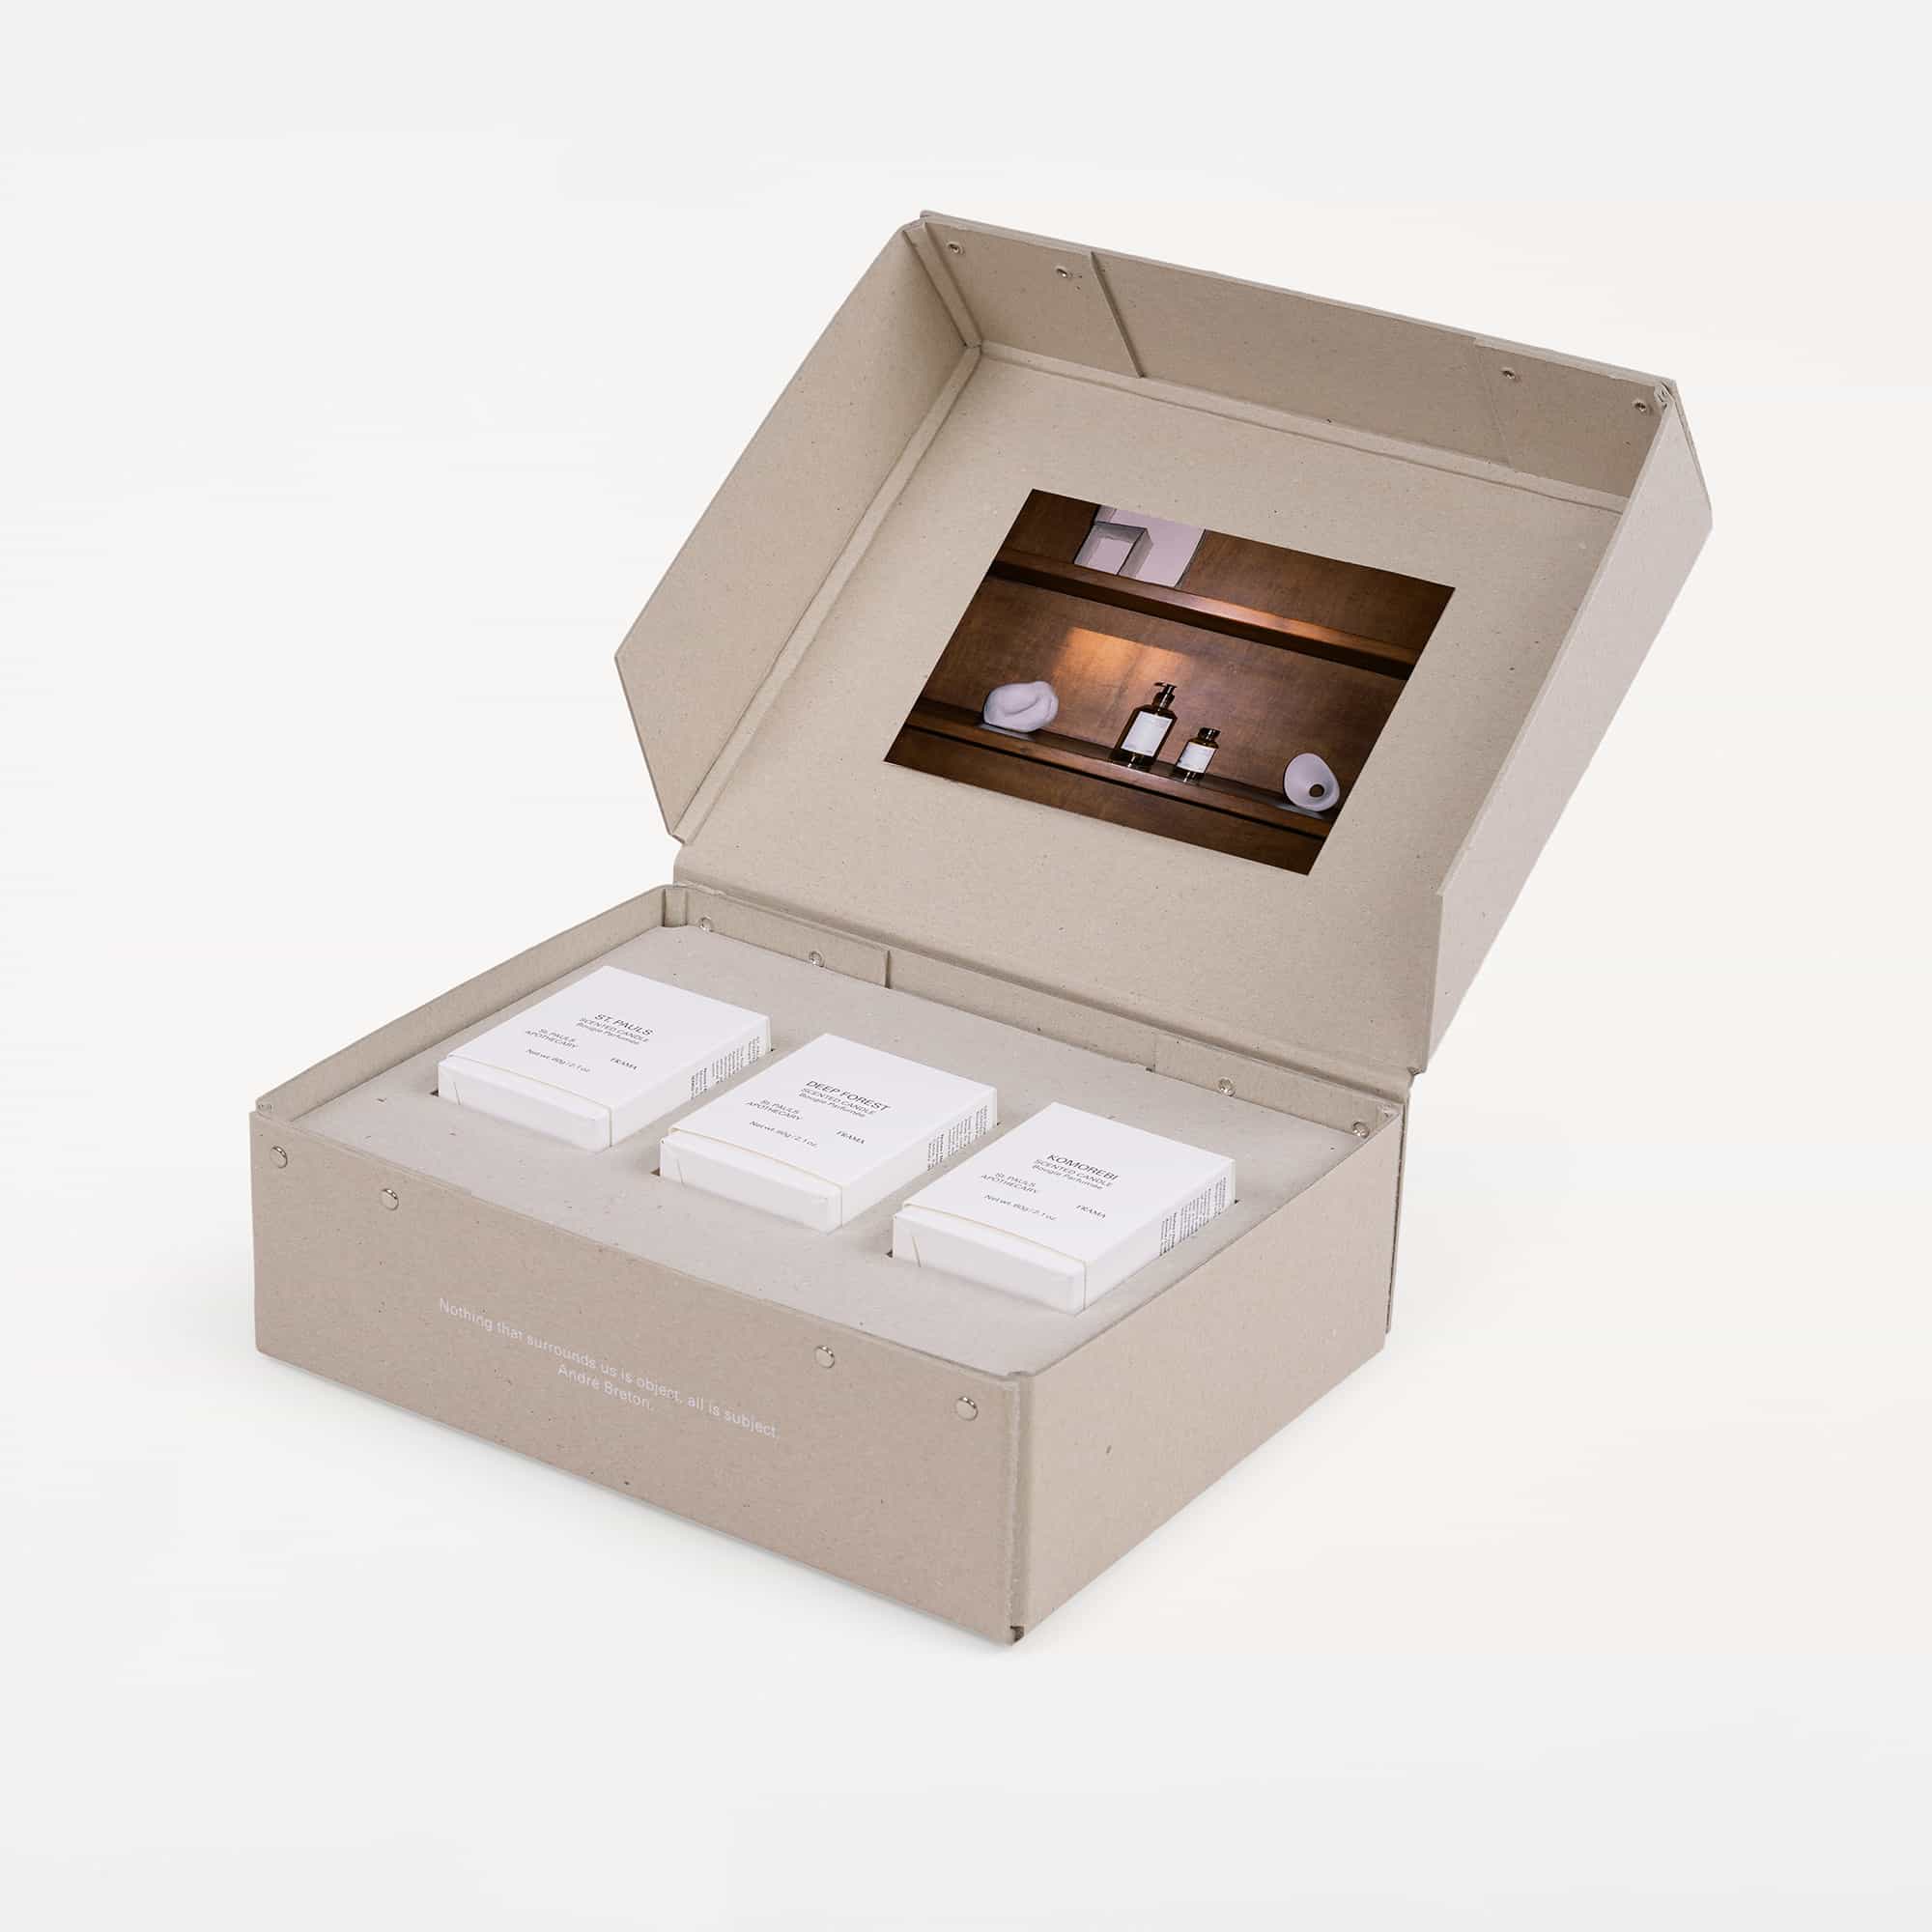 LÄNNA Gift Box - Scented Candle Set